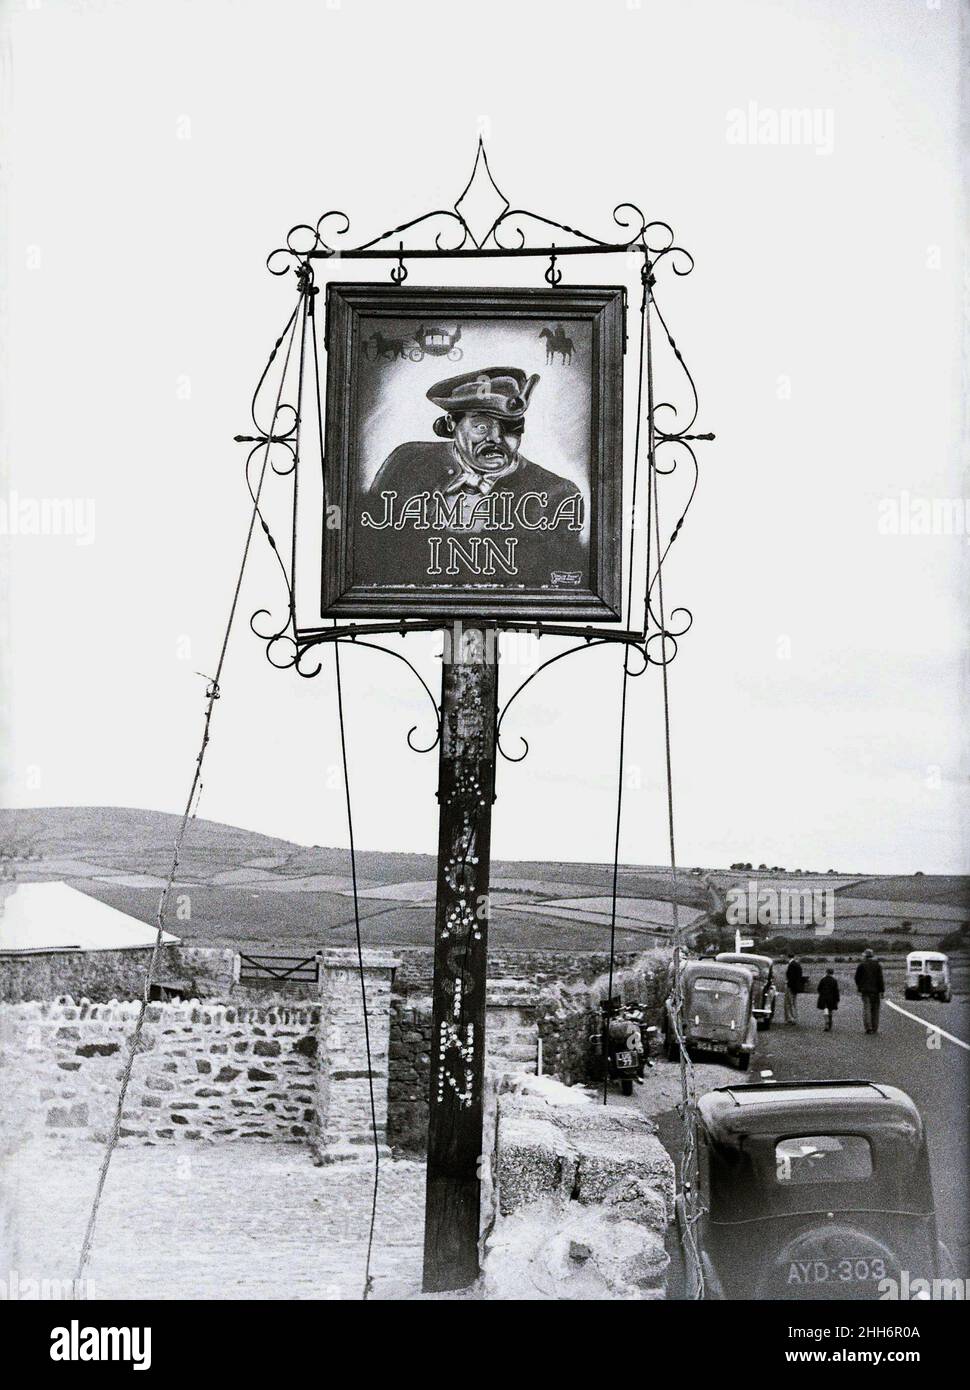 1950s, historical, Sign for the Jamaica Inn, an historic smugglers pub on Bodmin moor, Bolventor, Cornwall, England, UK, with cars of the era parked roadside. Built in 1750, this old coaching inn is immortalised in writer Daphne du Maurier's famous novel of the same name. Stock Photo